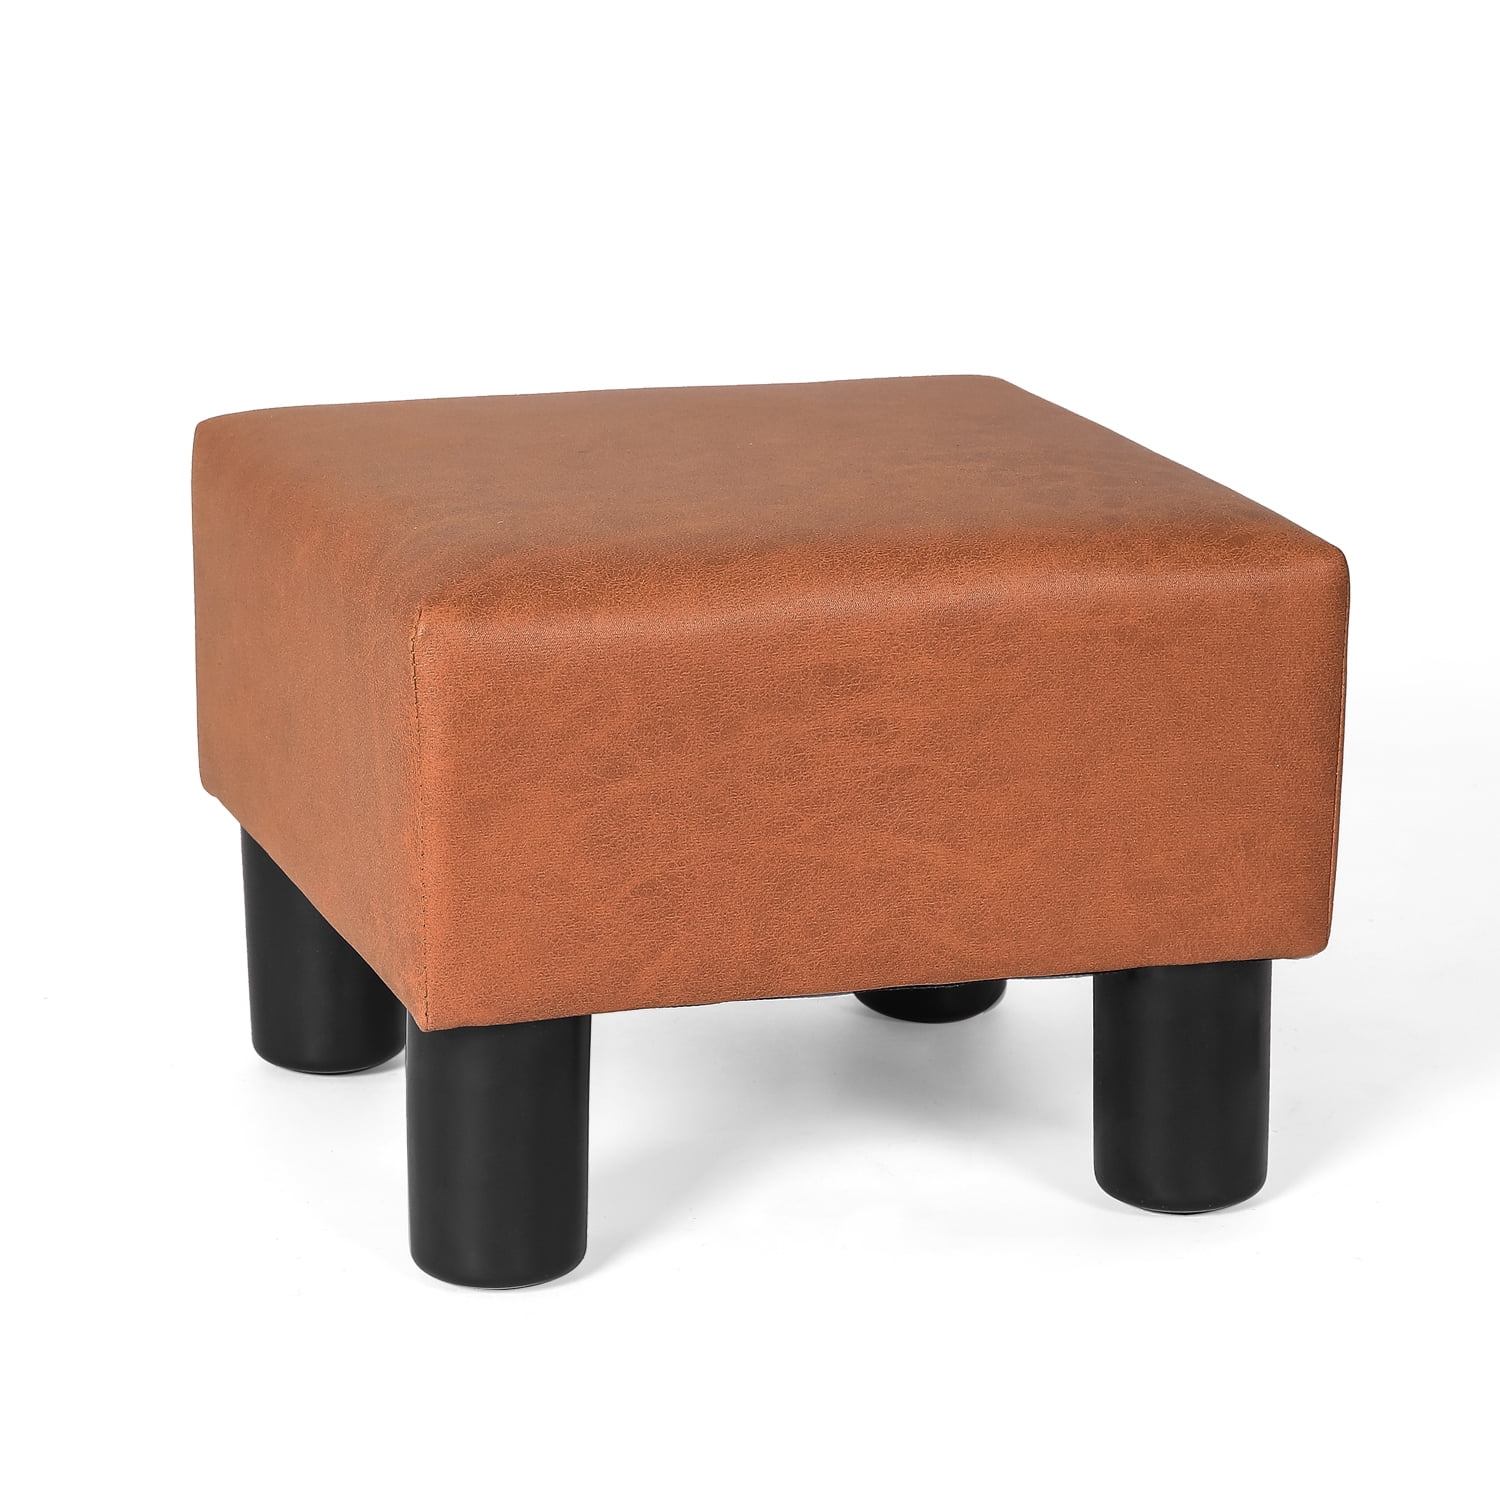 Joveco Small Footstool Ottoman, PU Leather Footrest Square Foot Stool with  Non-Skid Plastic Legs, Modern Pets Step Stool for Couch Desk Office Living  Room